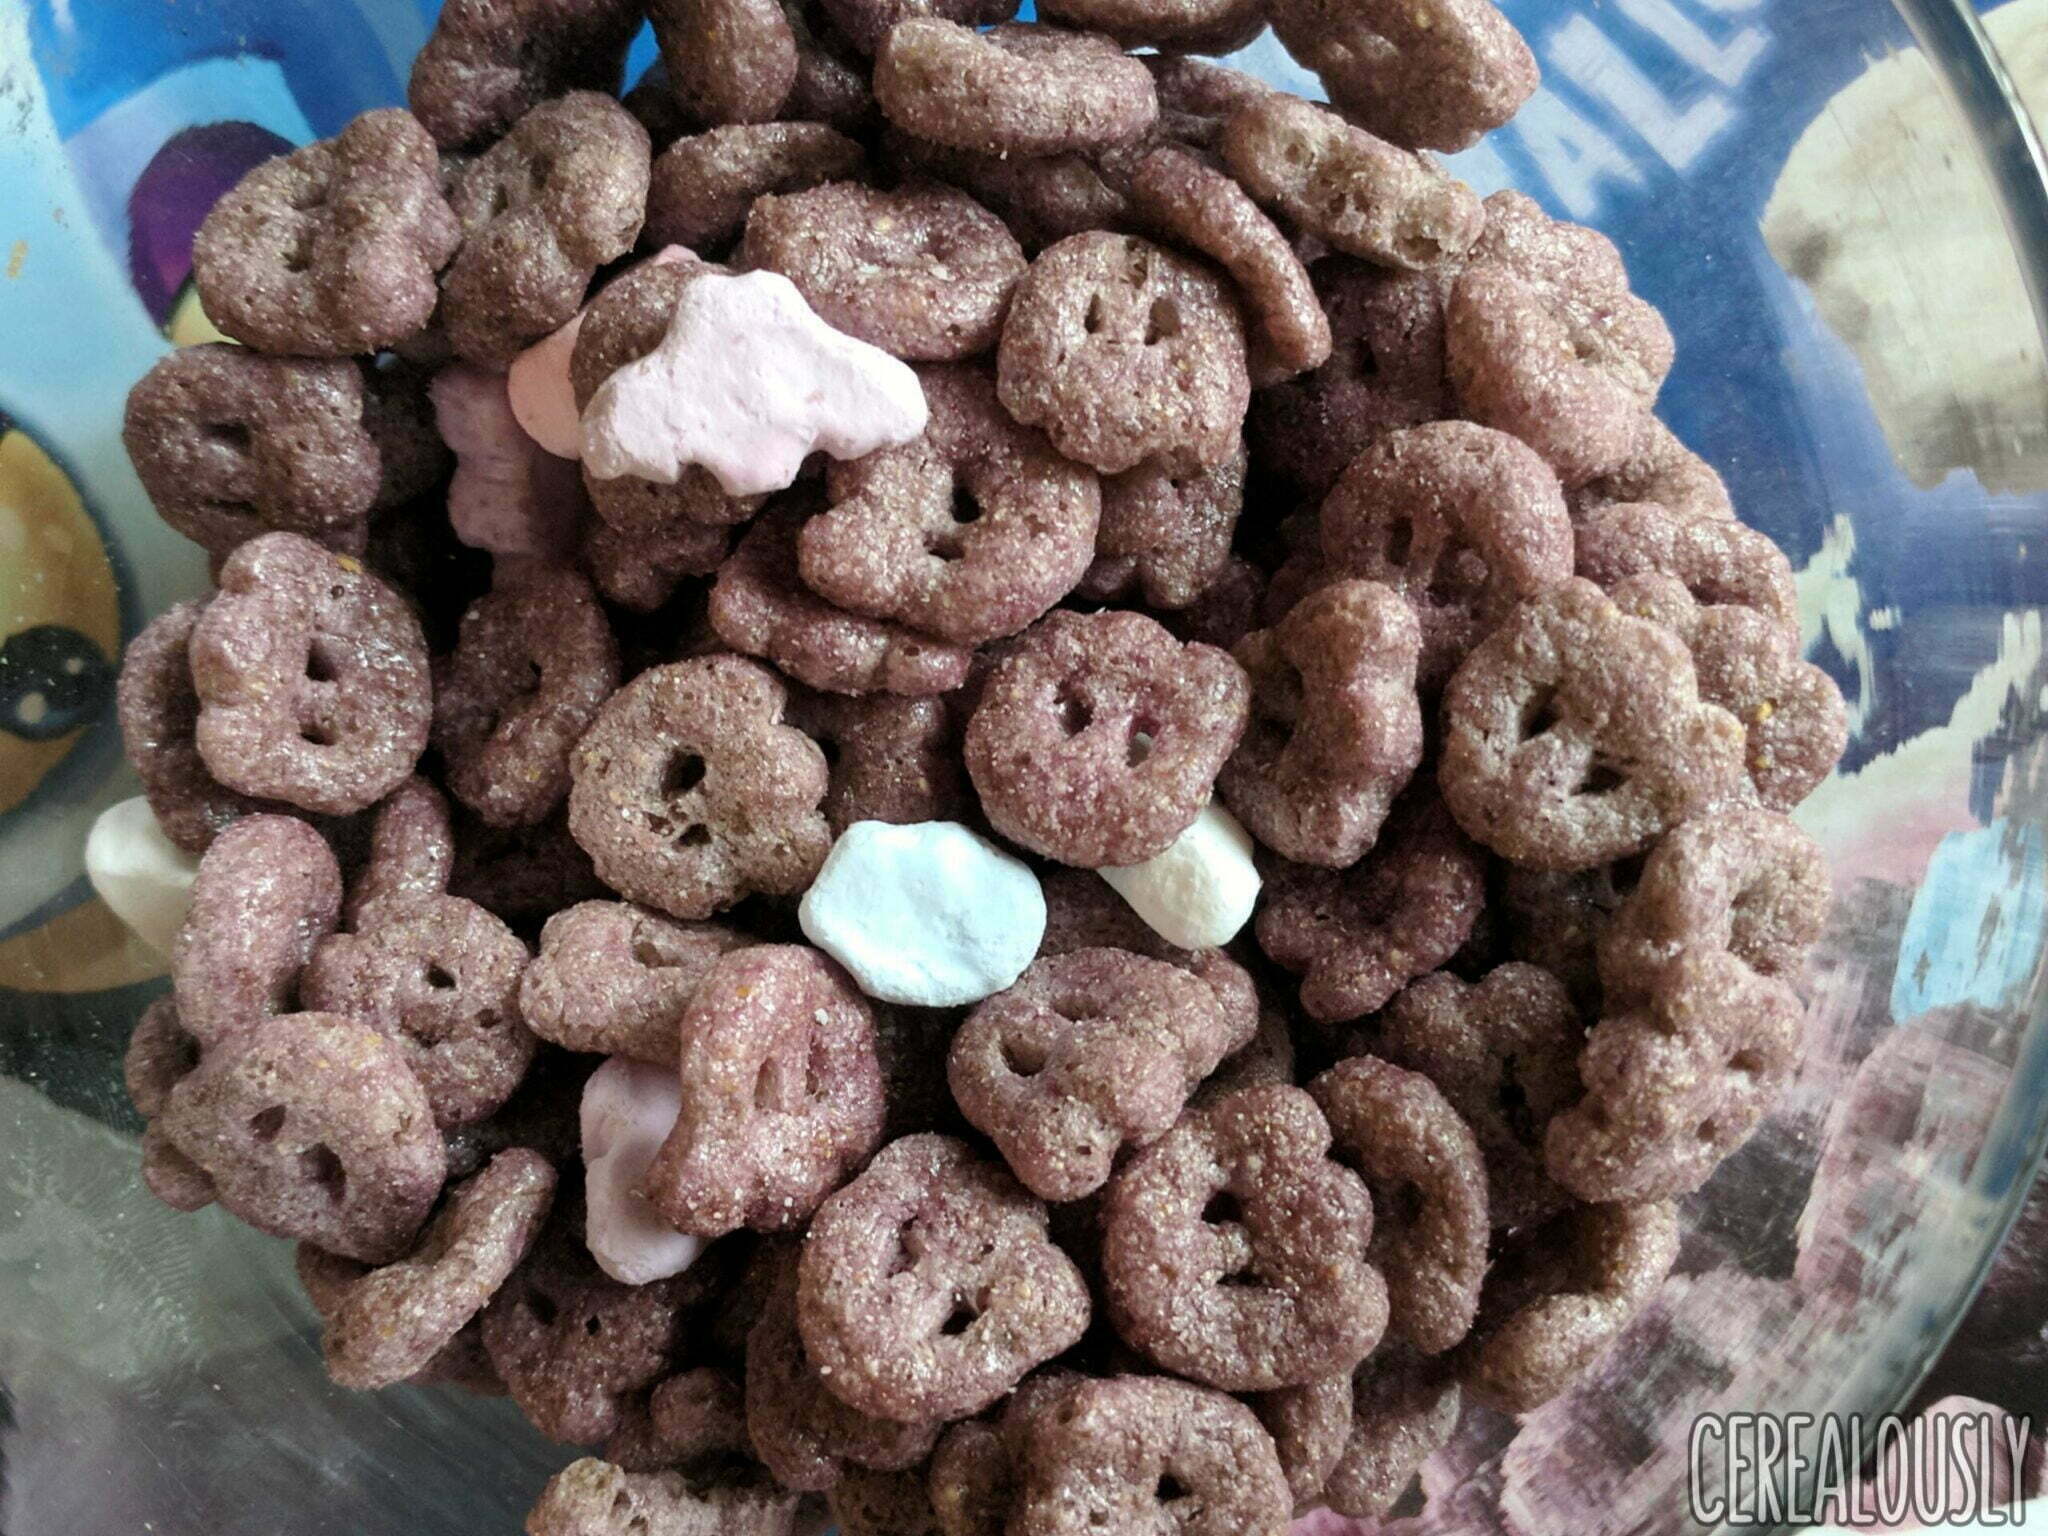 boo-berry cereal as an antidepressant